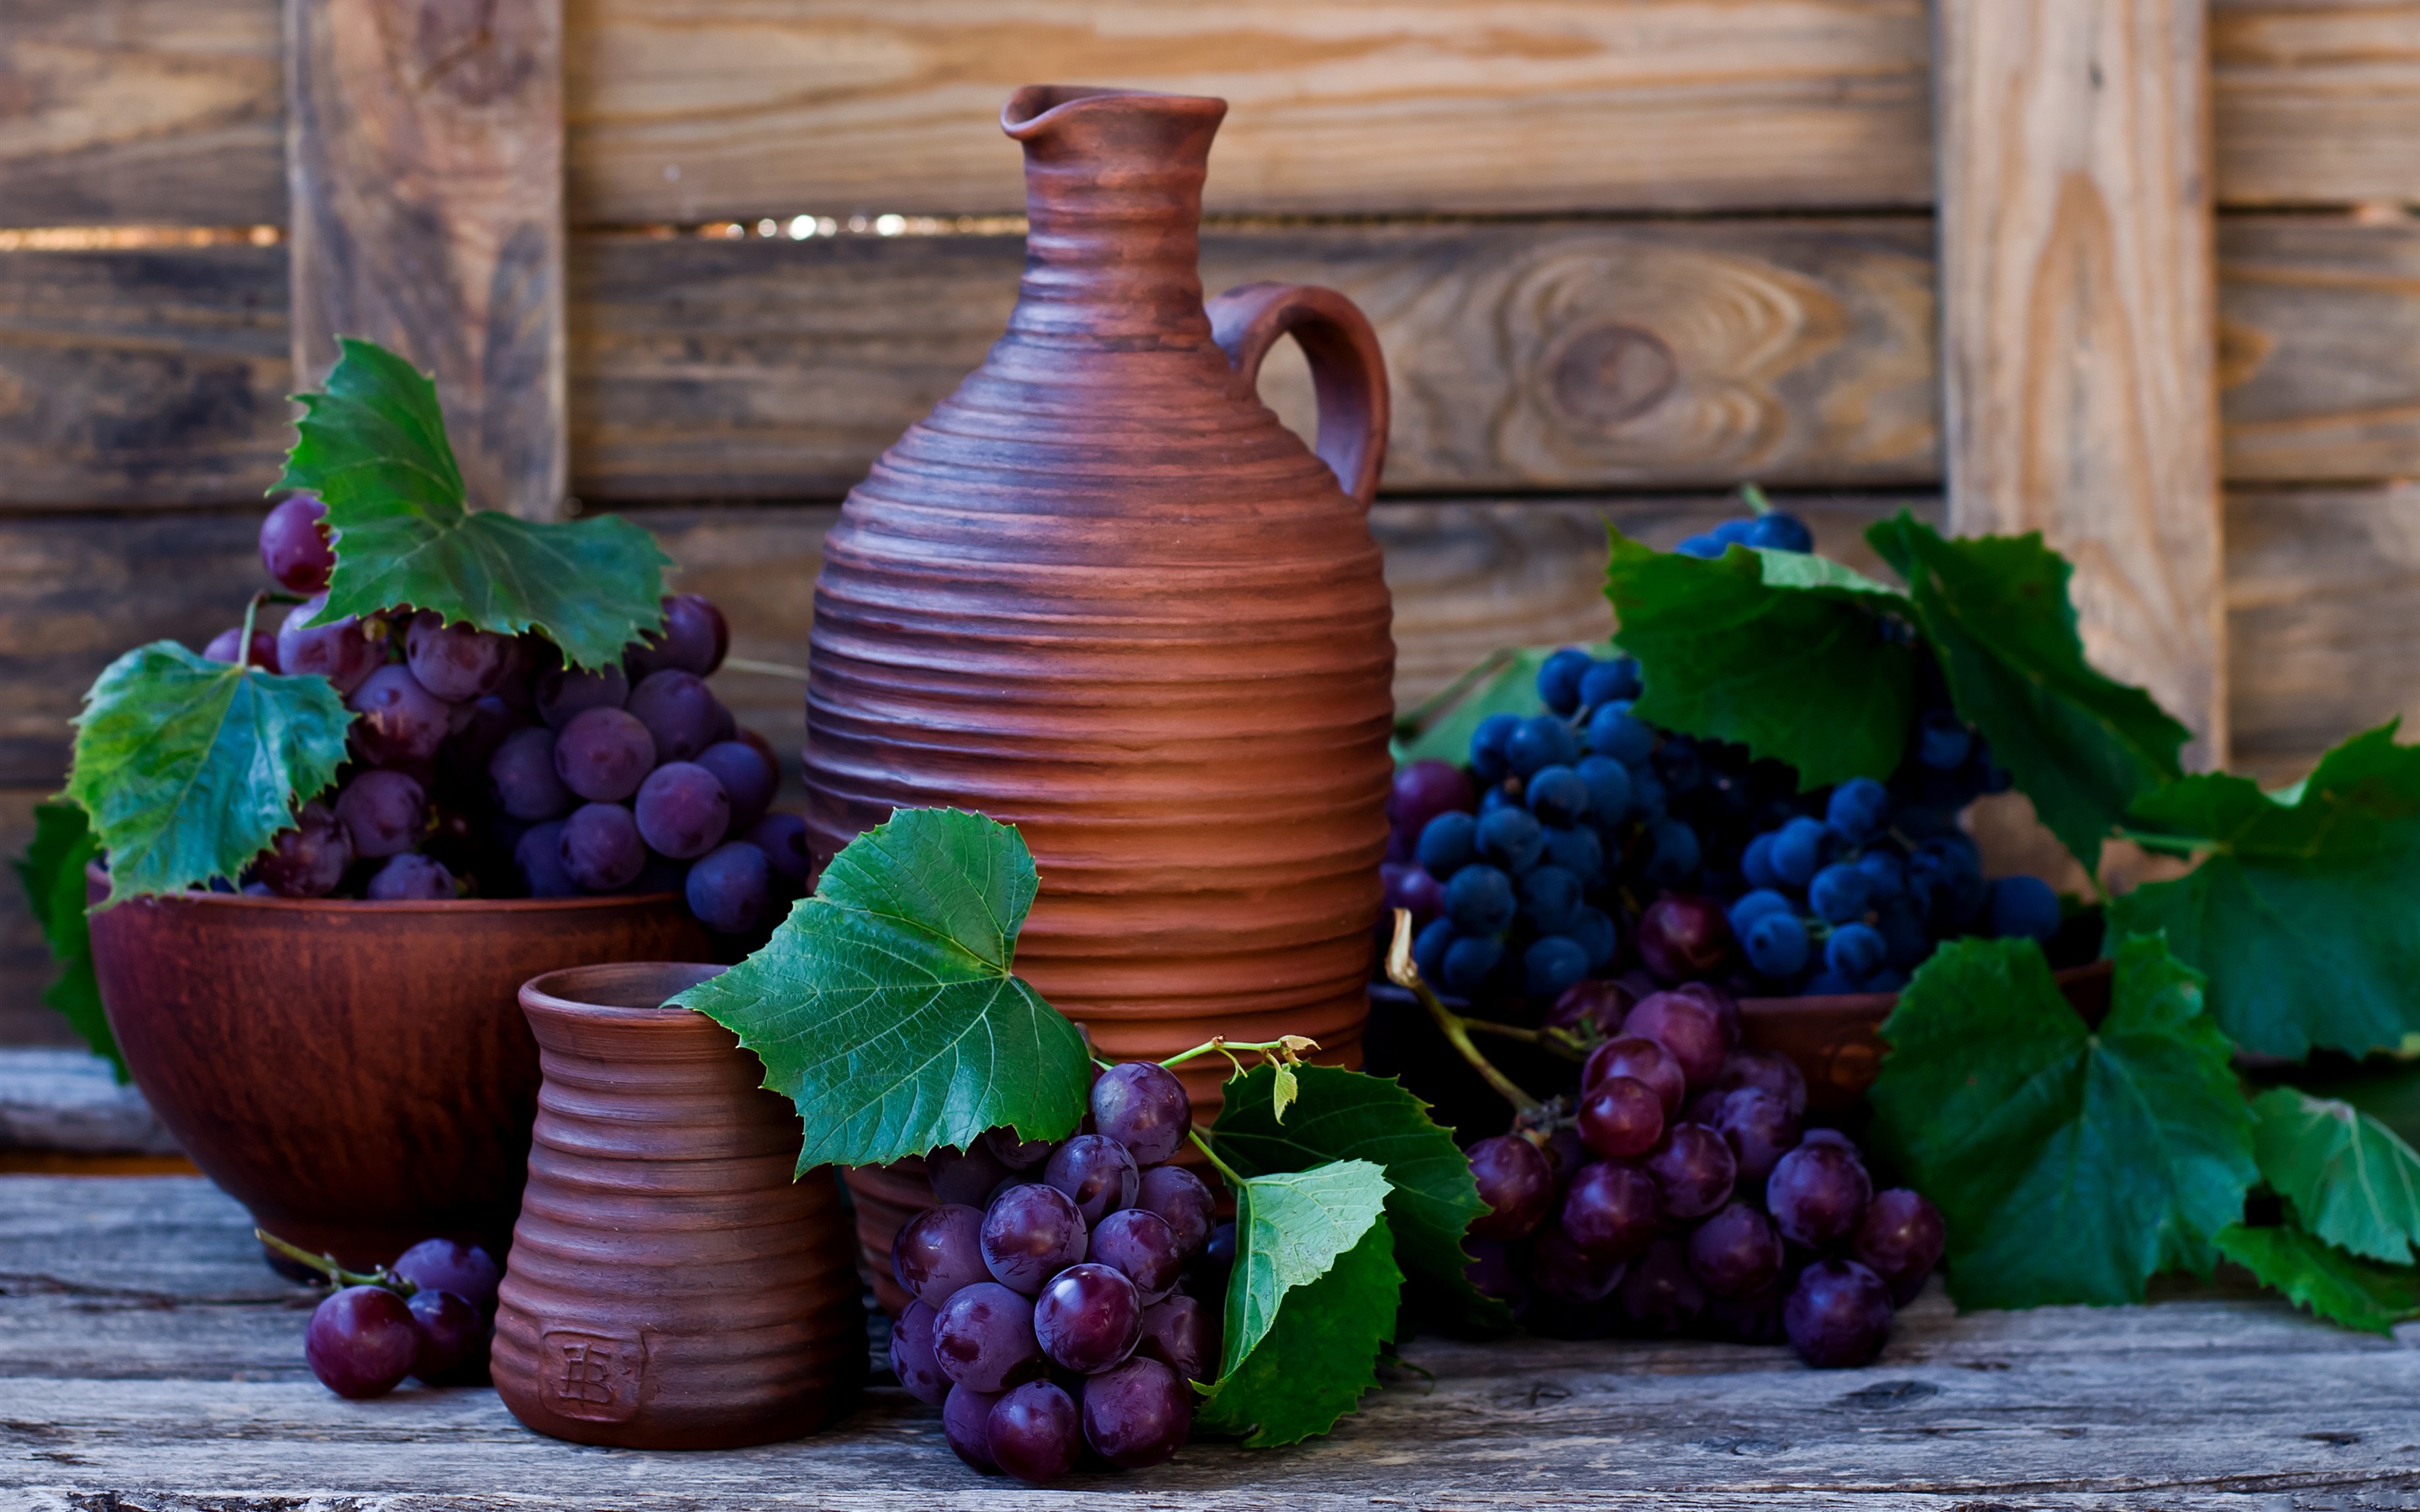 ceramic, photography, still life, bowl, fruit, grapes, purple wallpapers for tablet